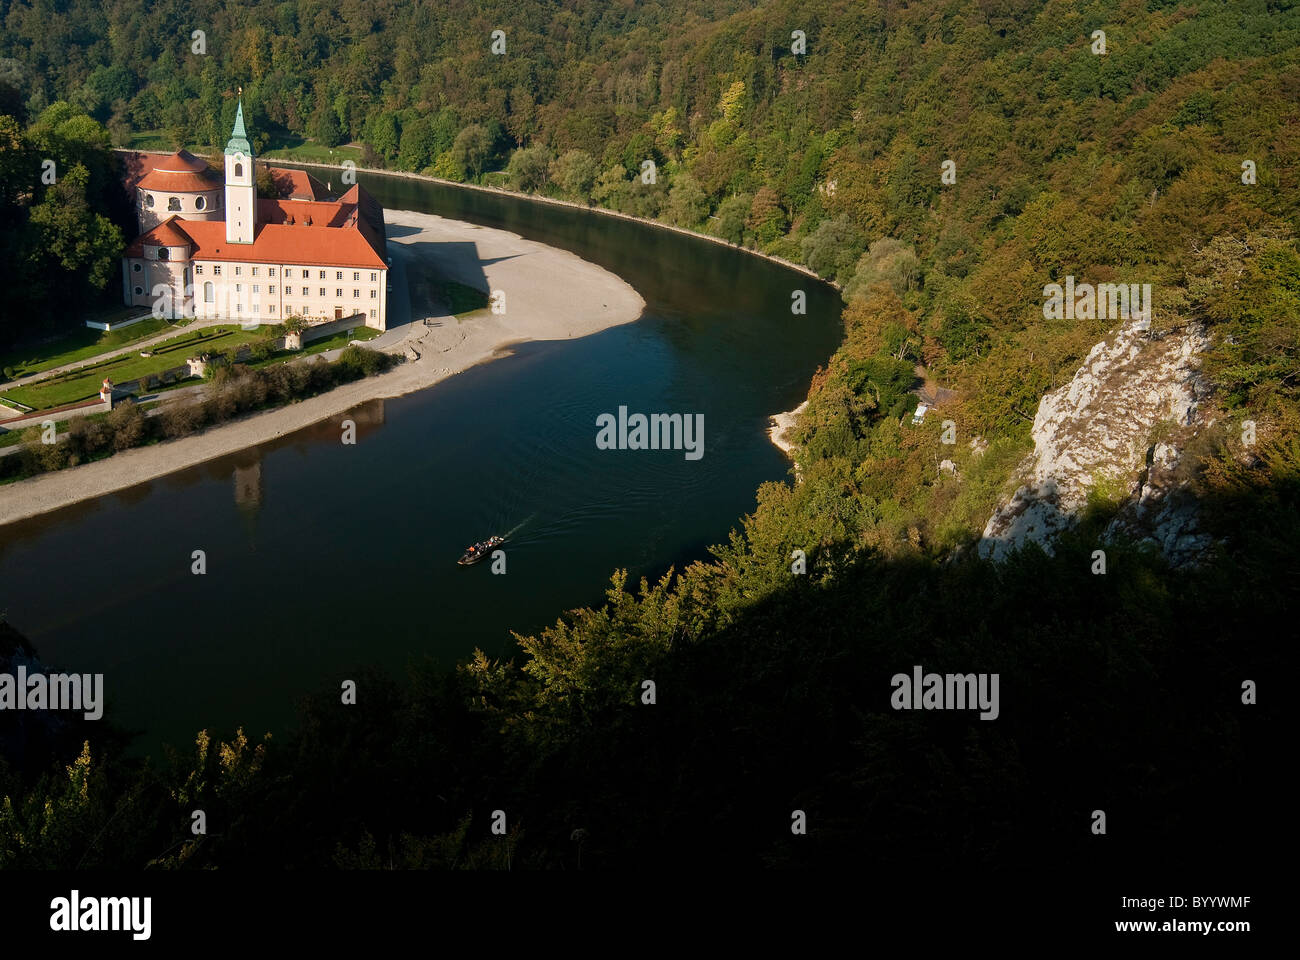 Weltenburg Abbey at the river Danube at Weltenburg Narrows in autumn, Bavaria, Germany. Stock Photo